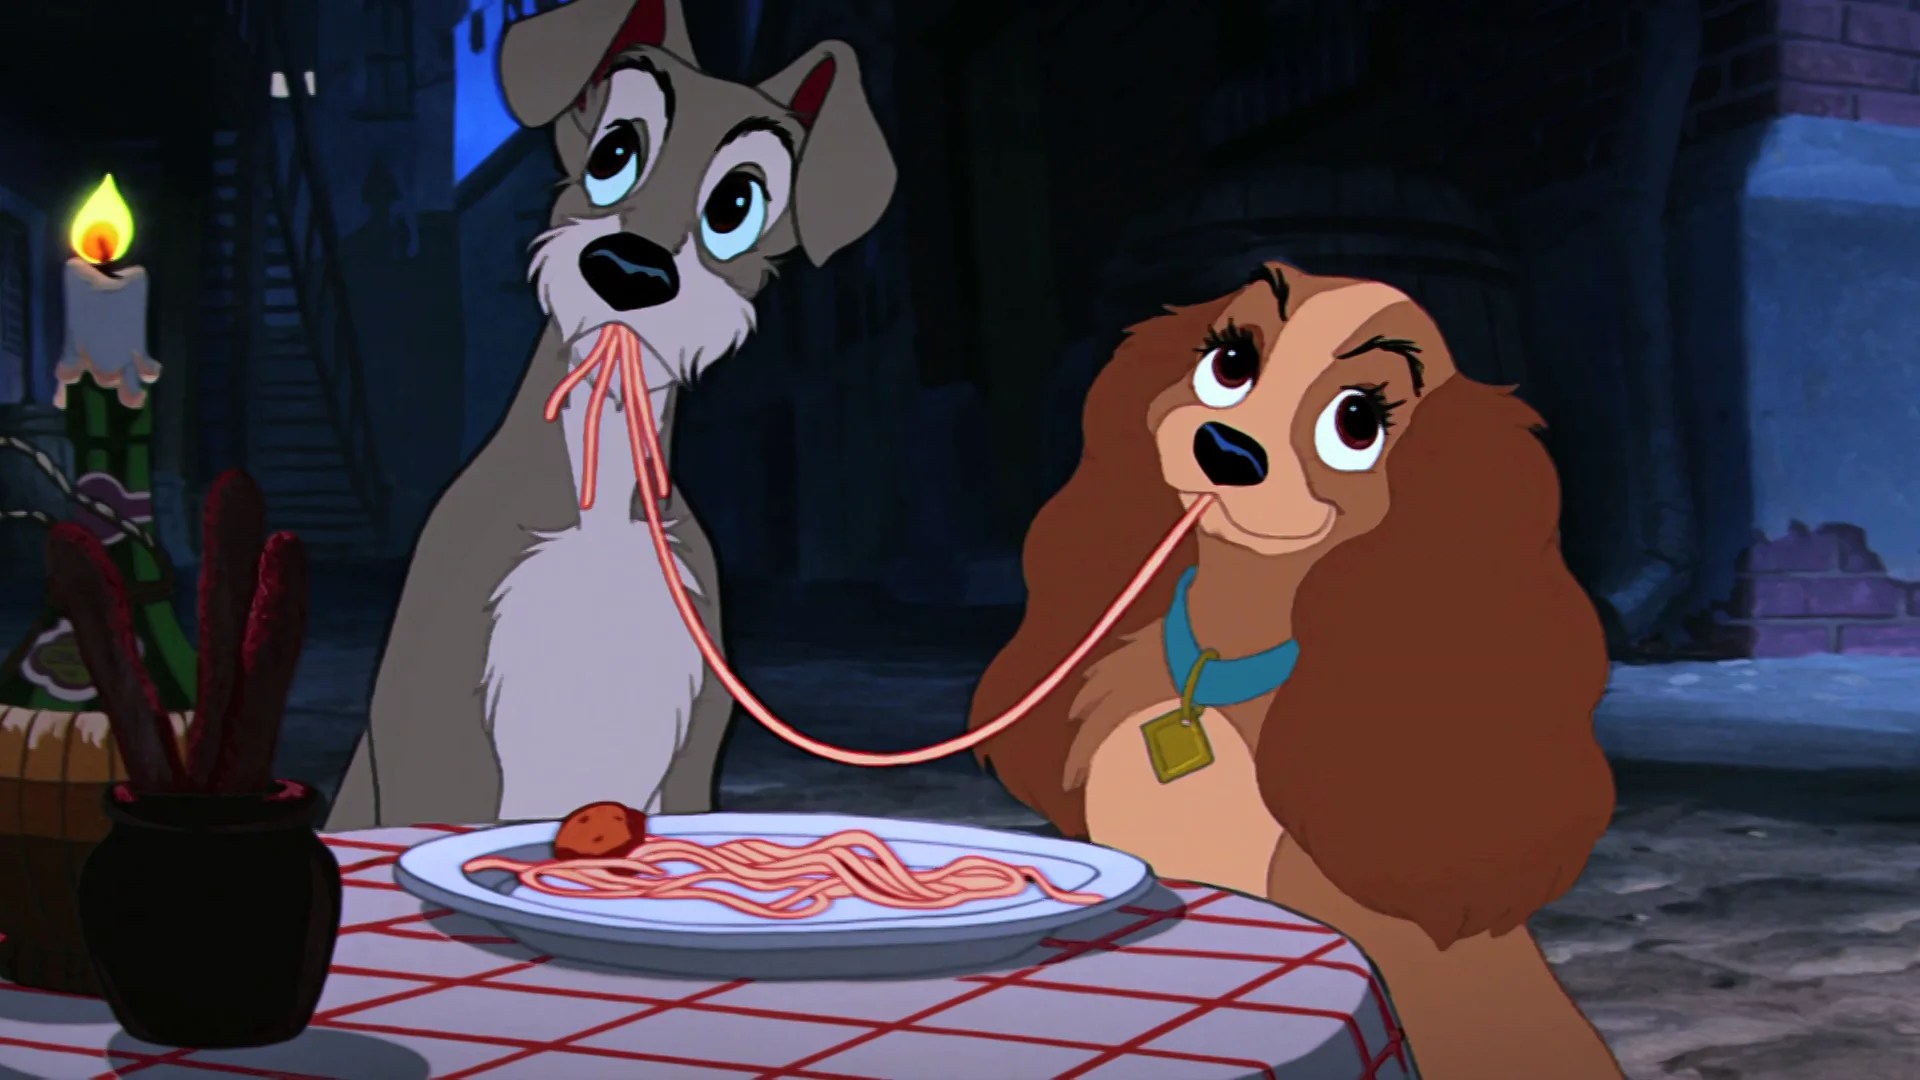 A scene from The Lady and the Tramp